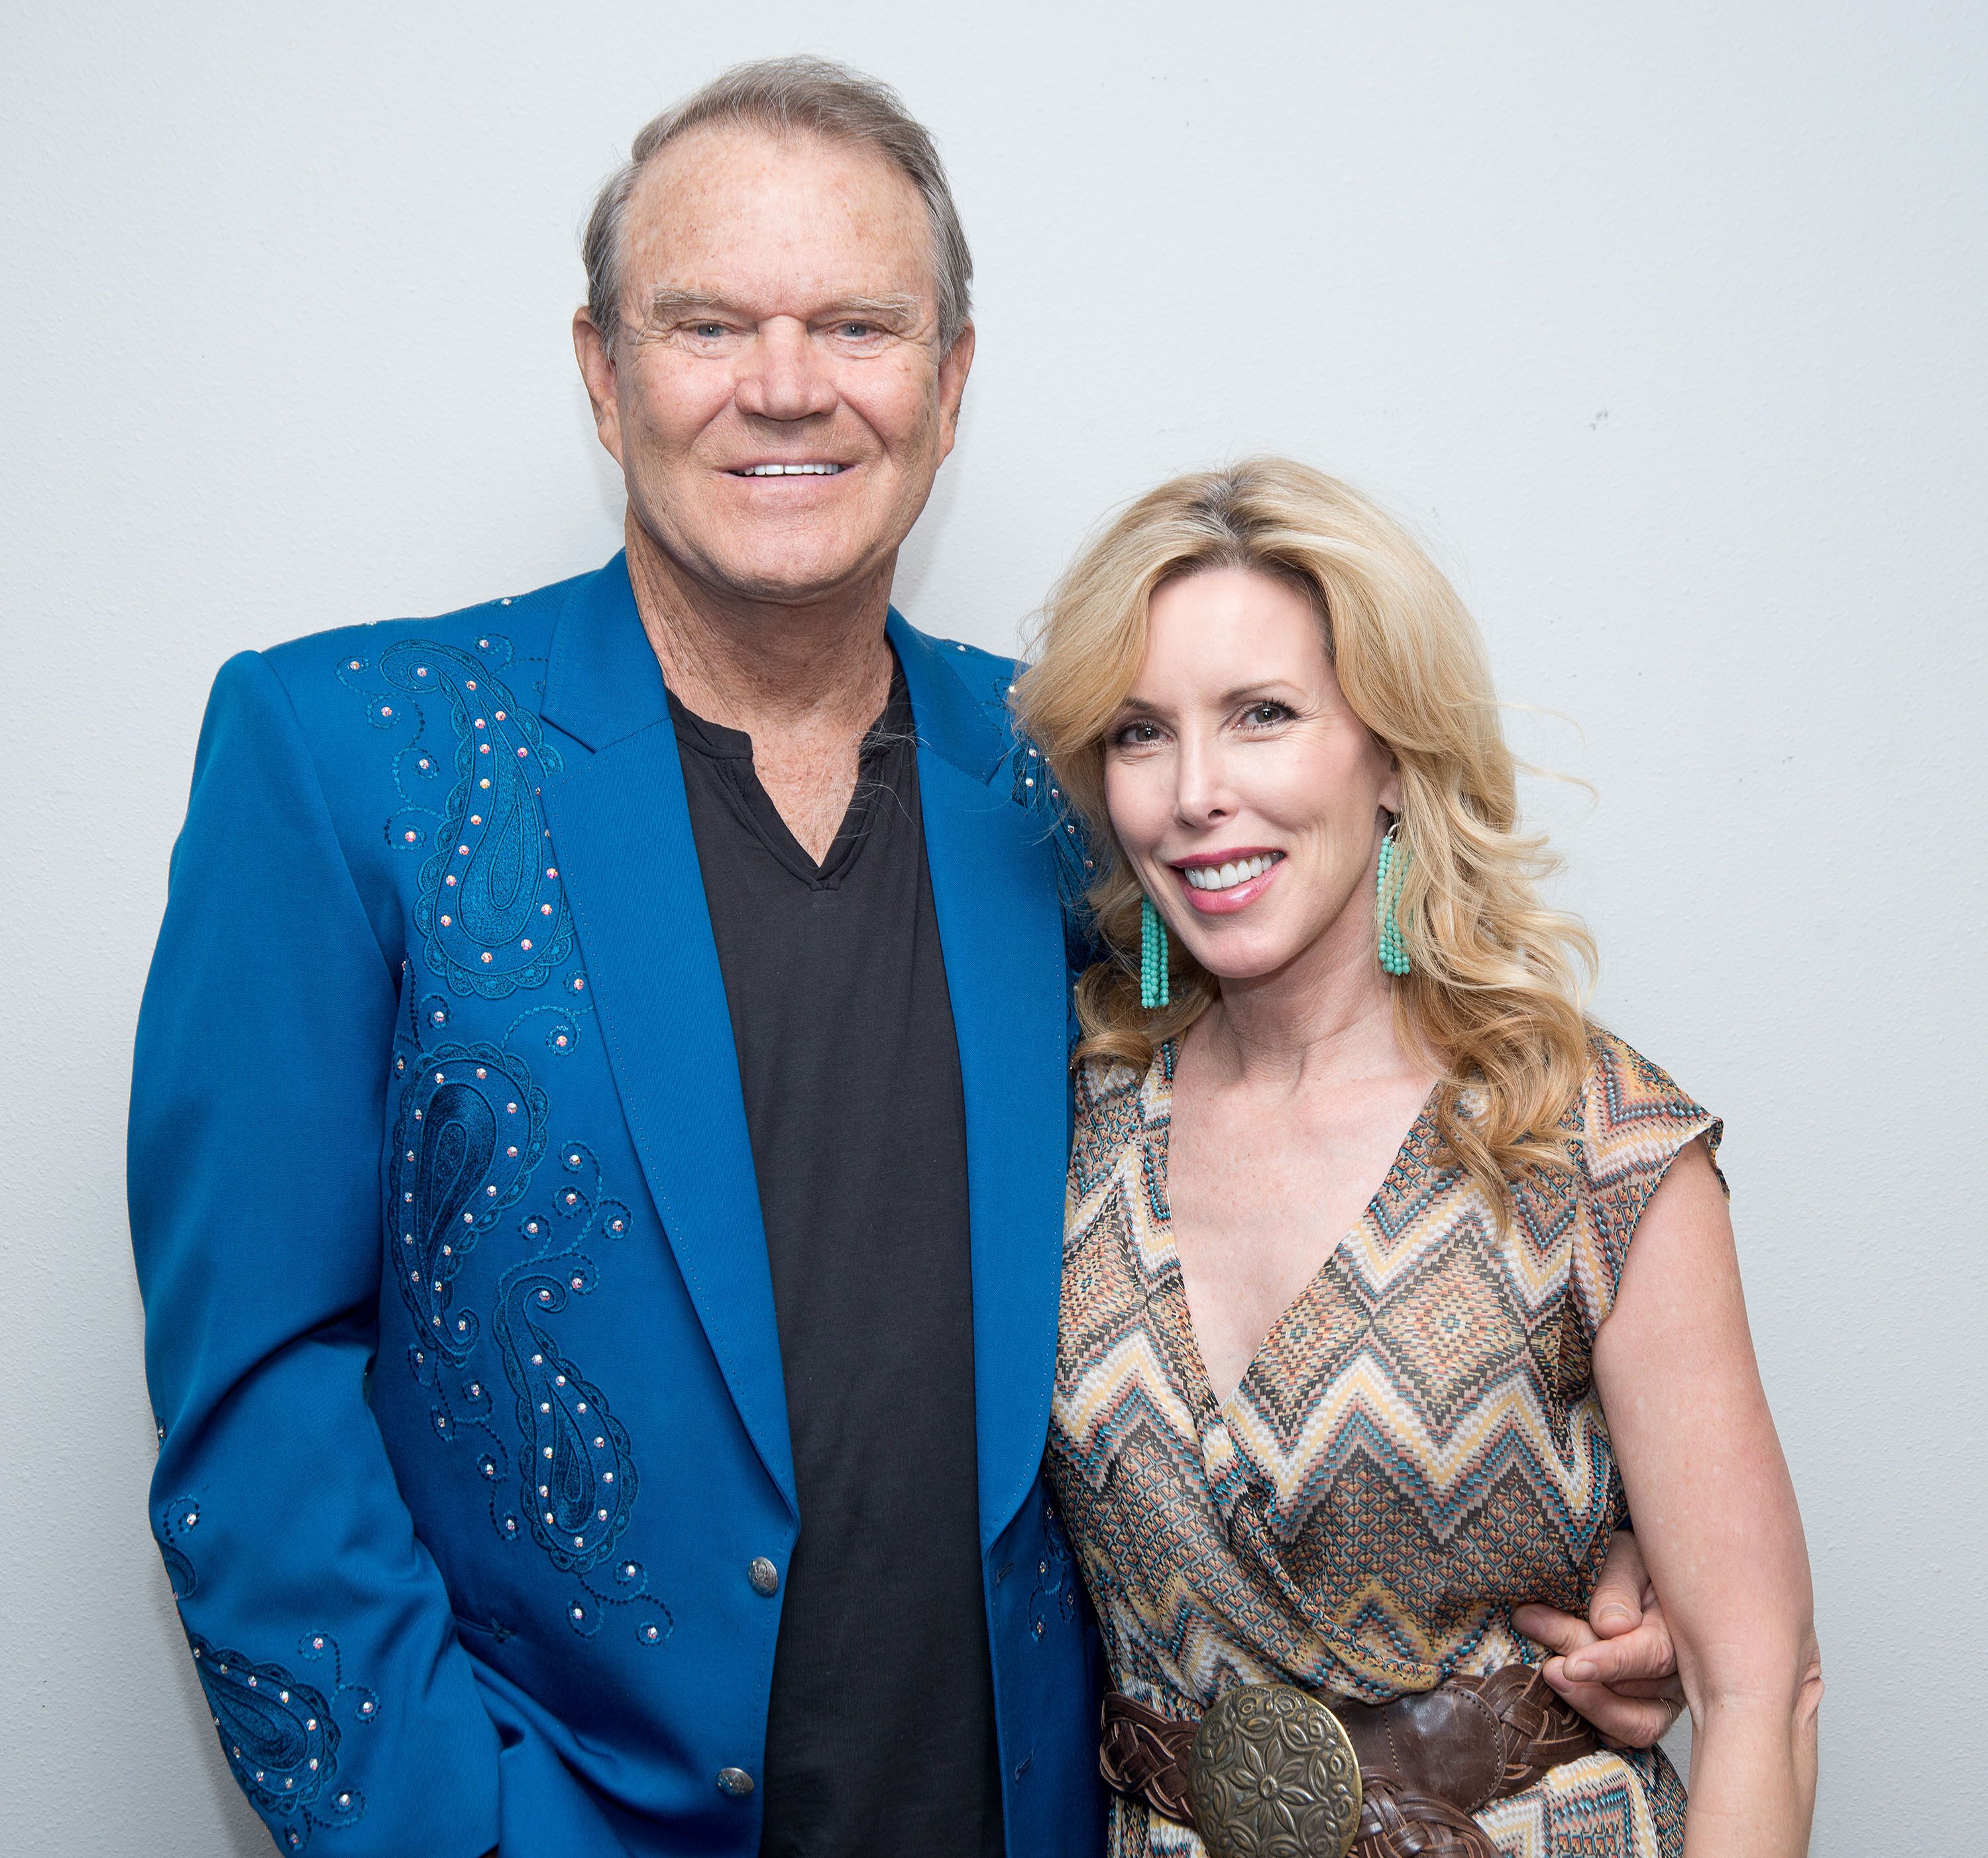 Glen Campbell poses backstage with his wife Kim following his Goodbye Tour performance at Route 66 Casino's Legends Theater on July 29, 2012 | Photo: Getty Images